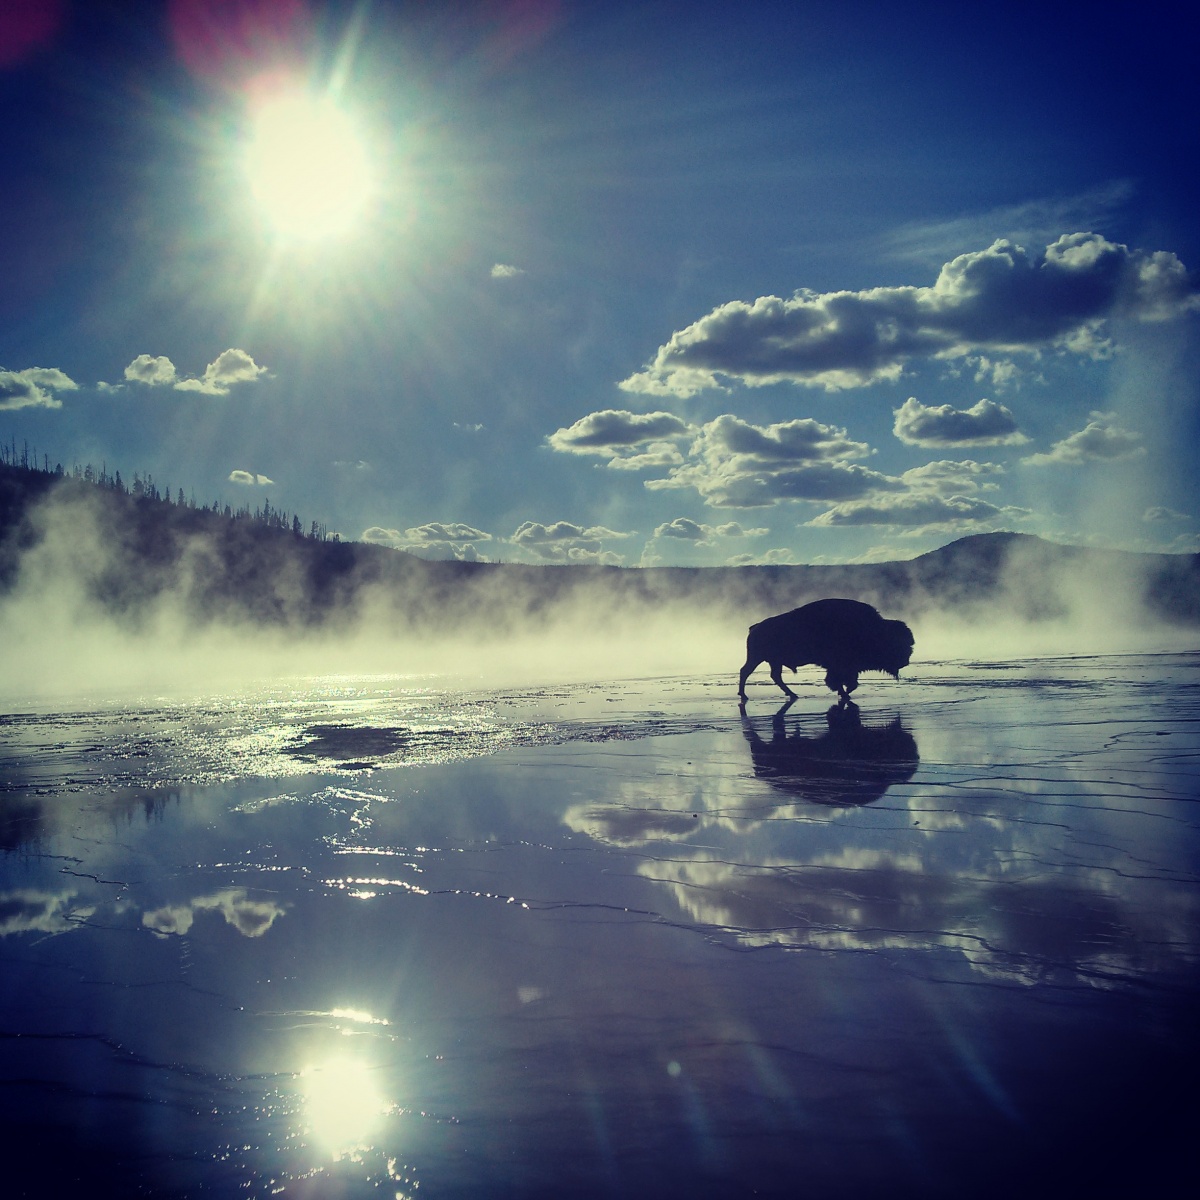 A bison walking by a steaming hot spring in bright sunlight.